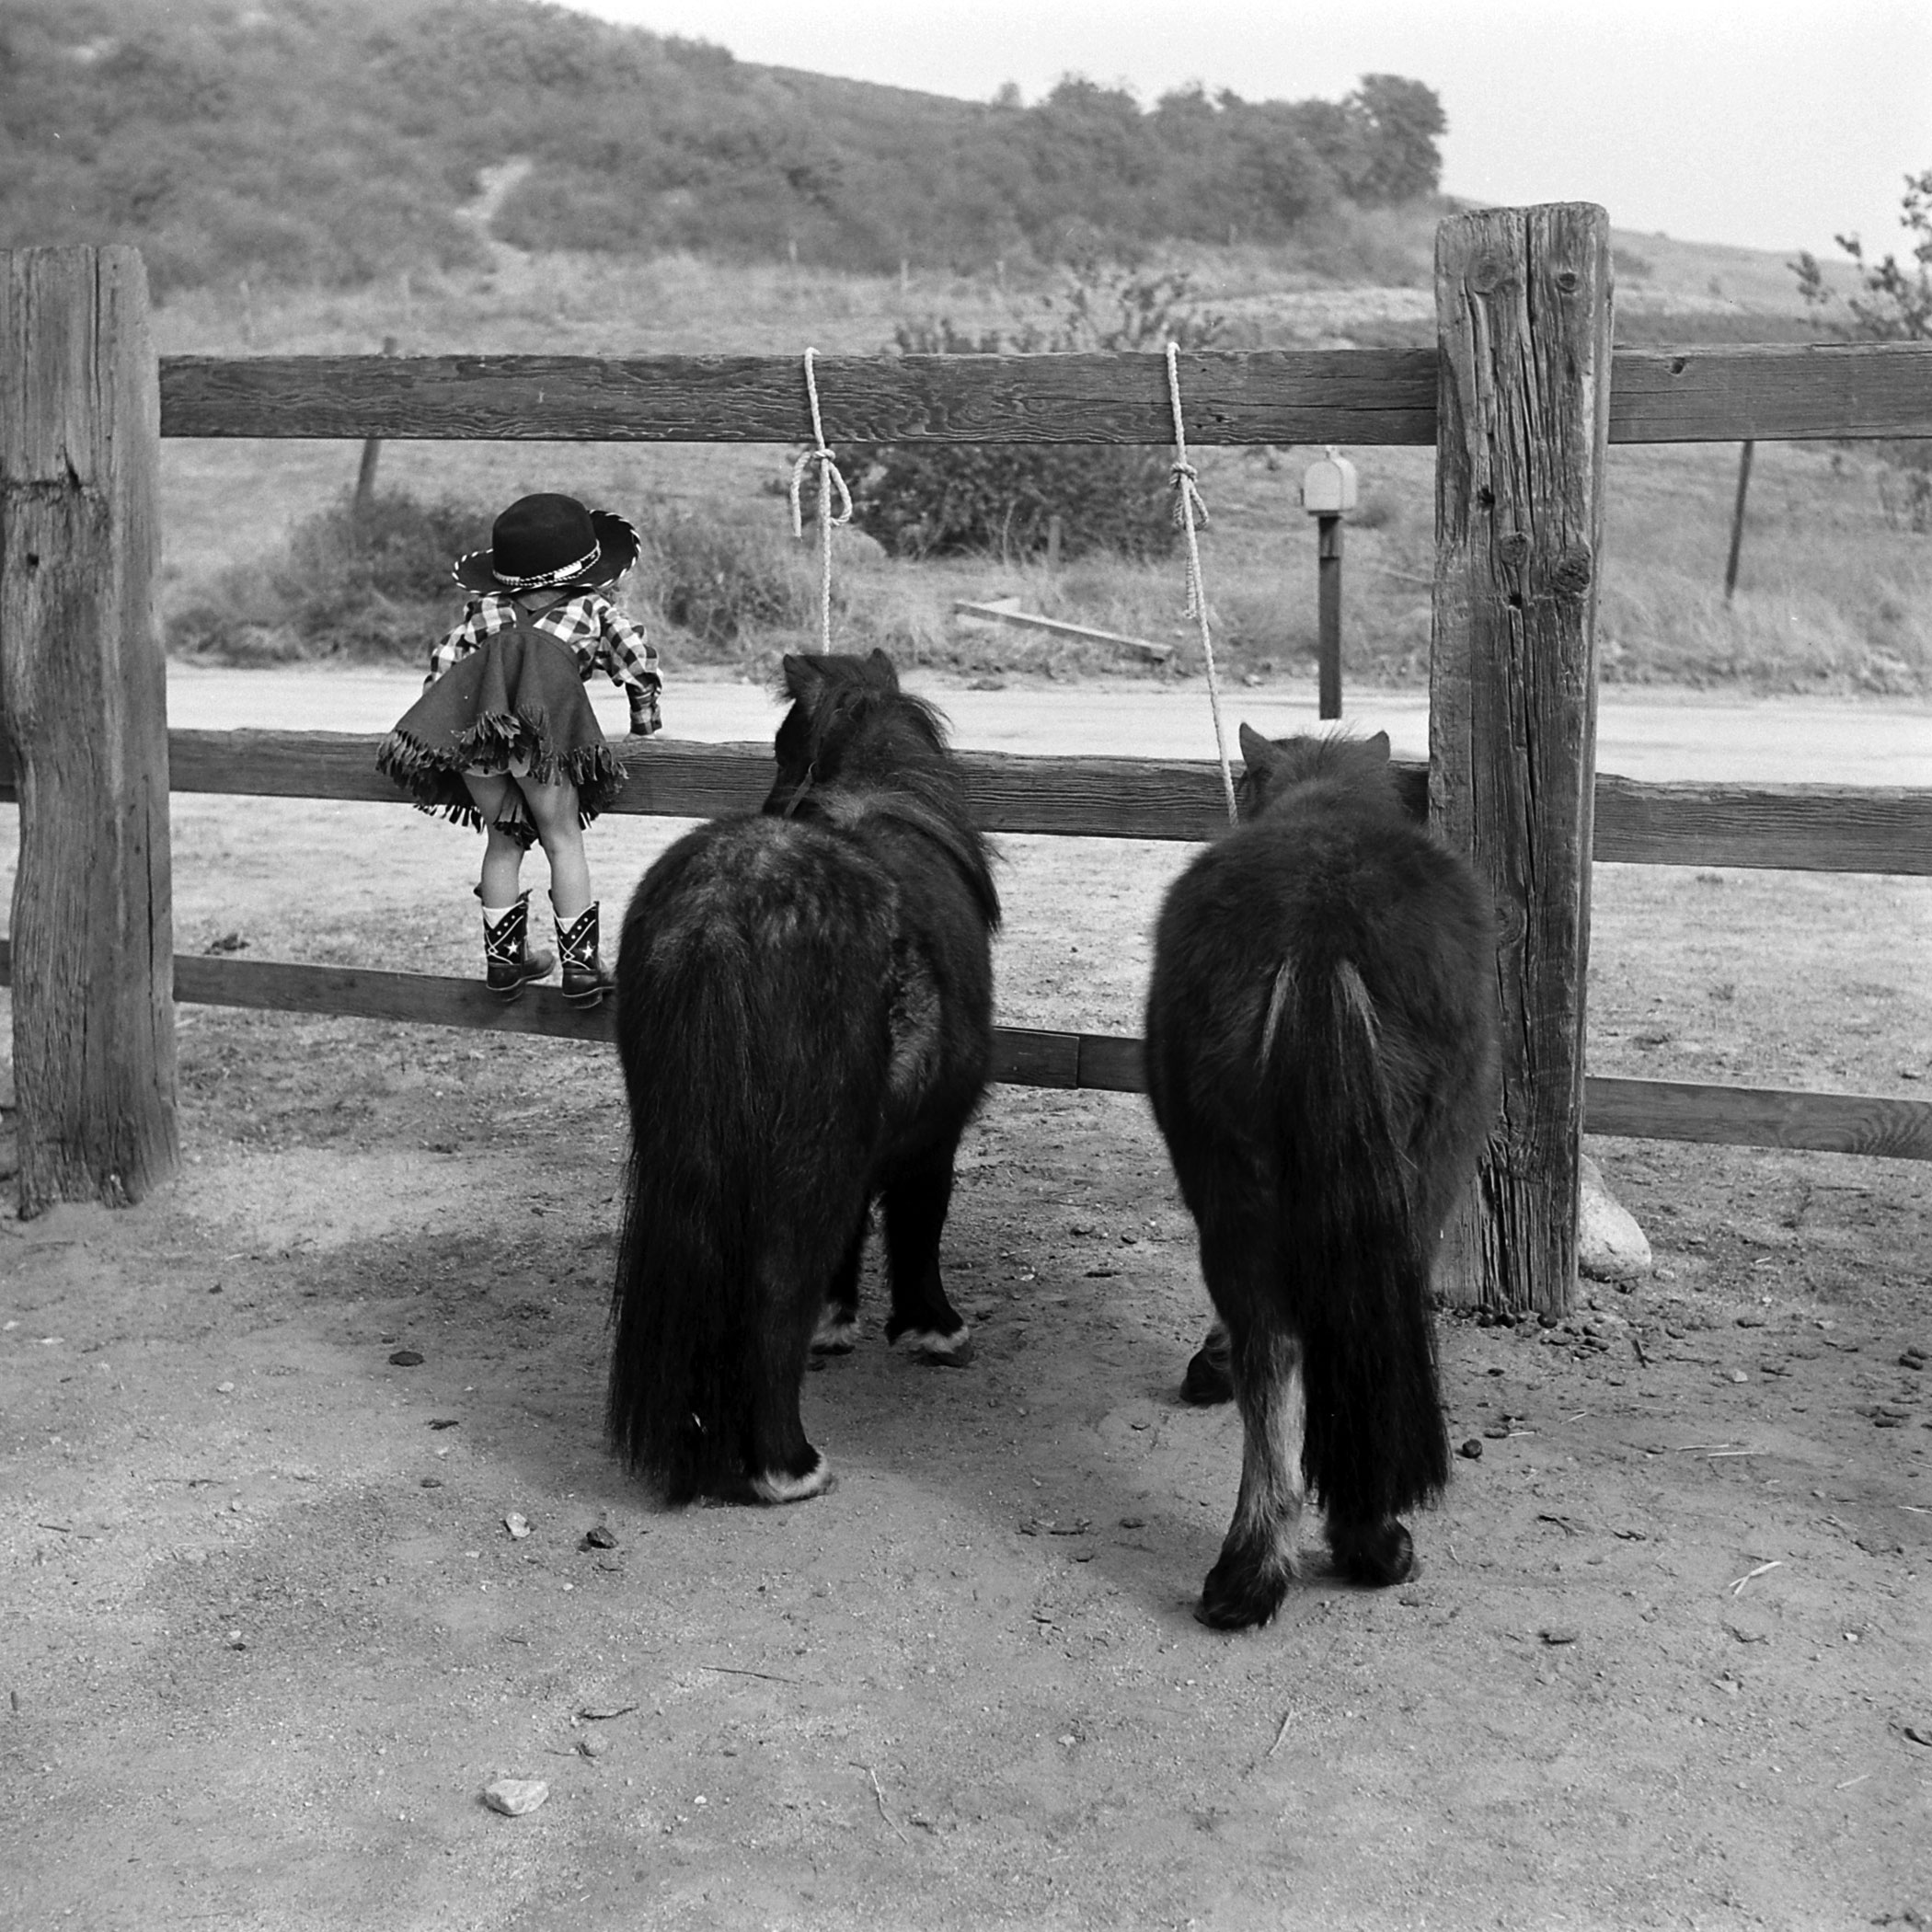 Cynthia with two miniature horses at the Lilliput Ranch in California.